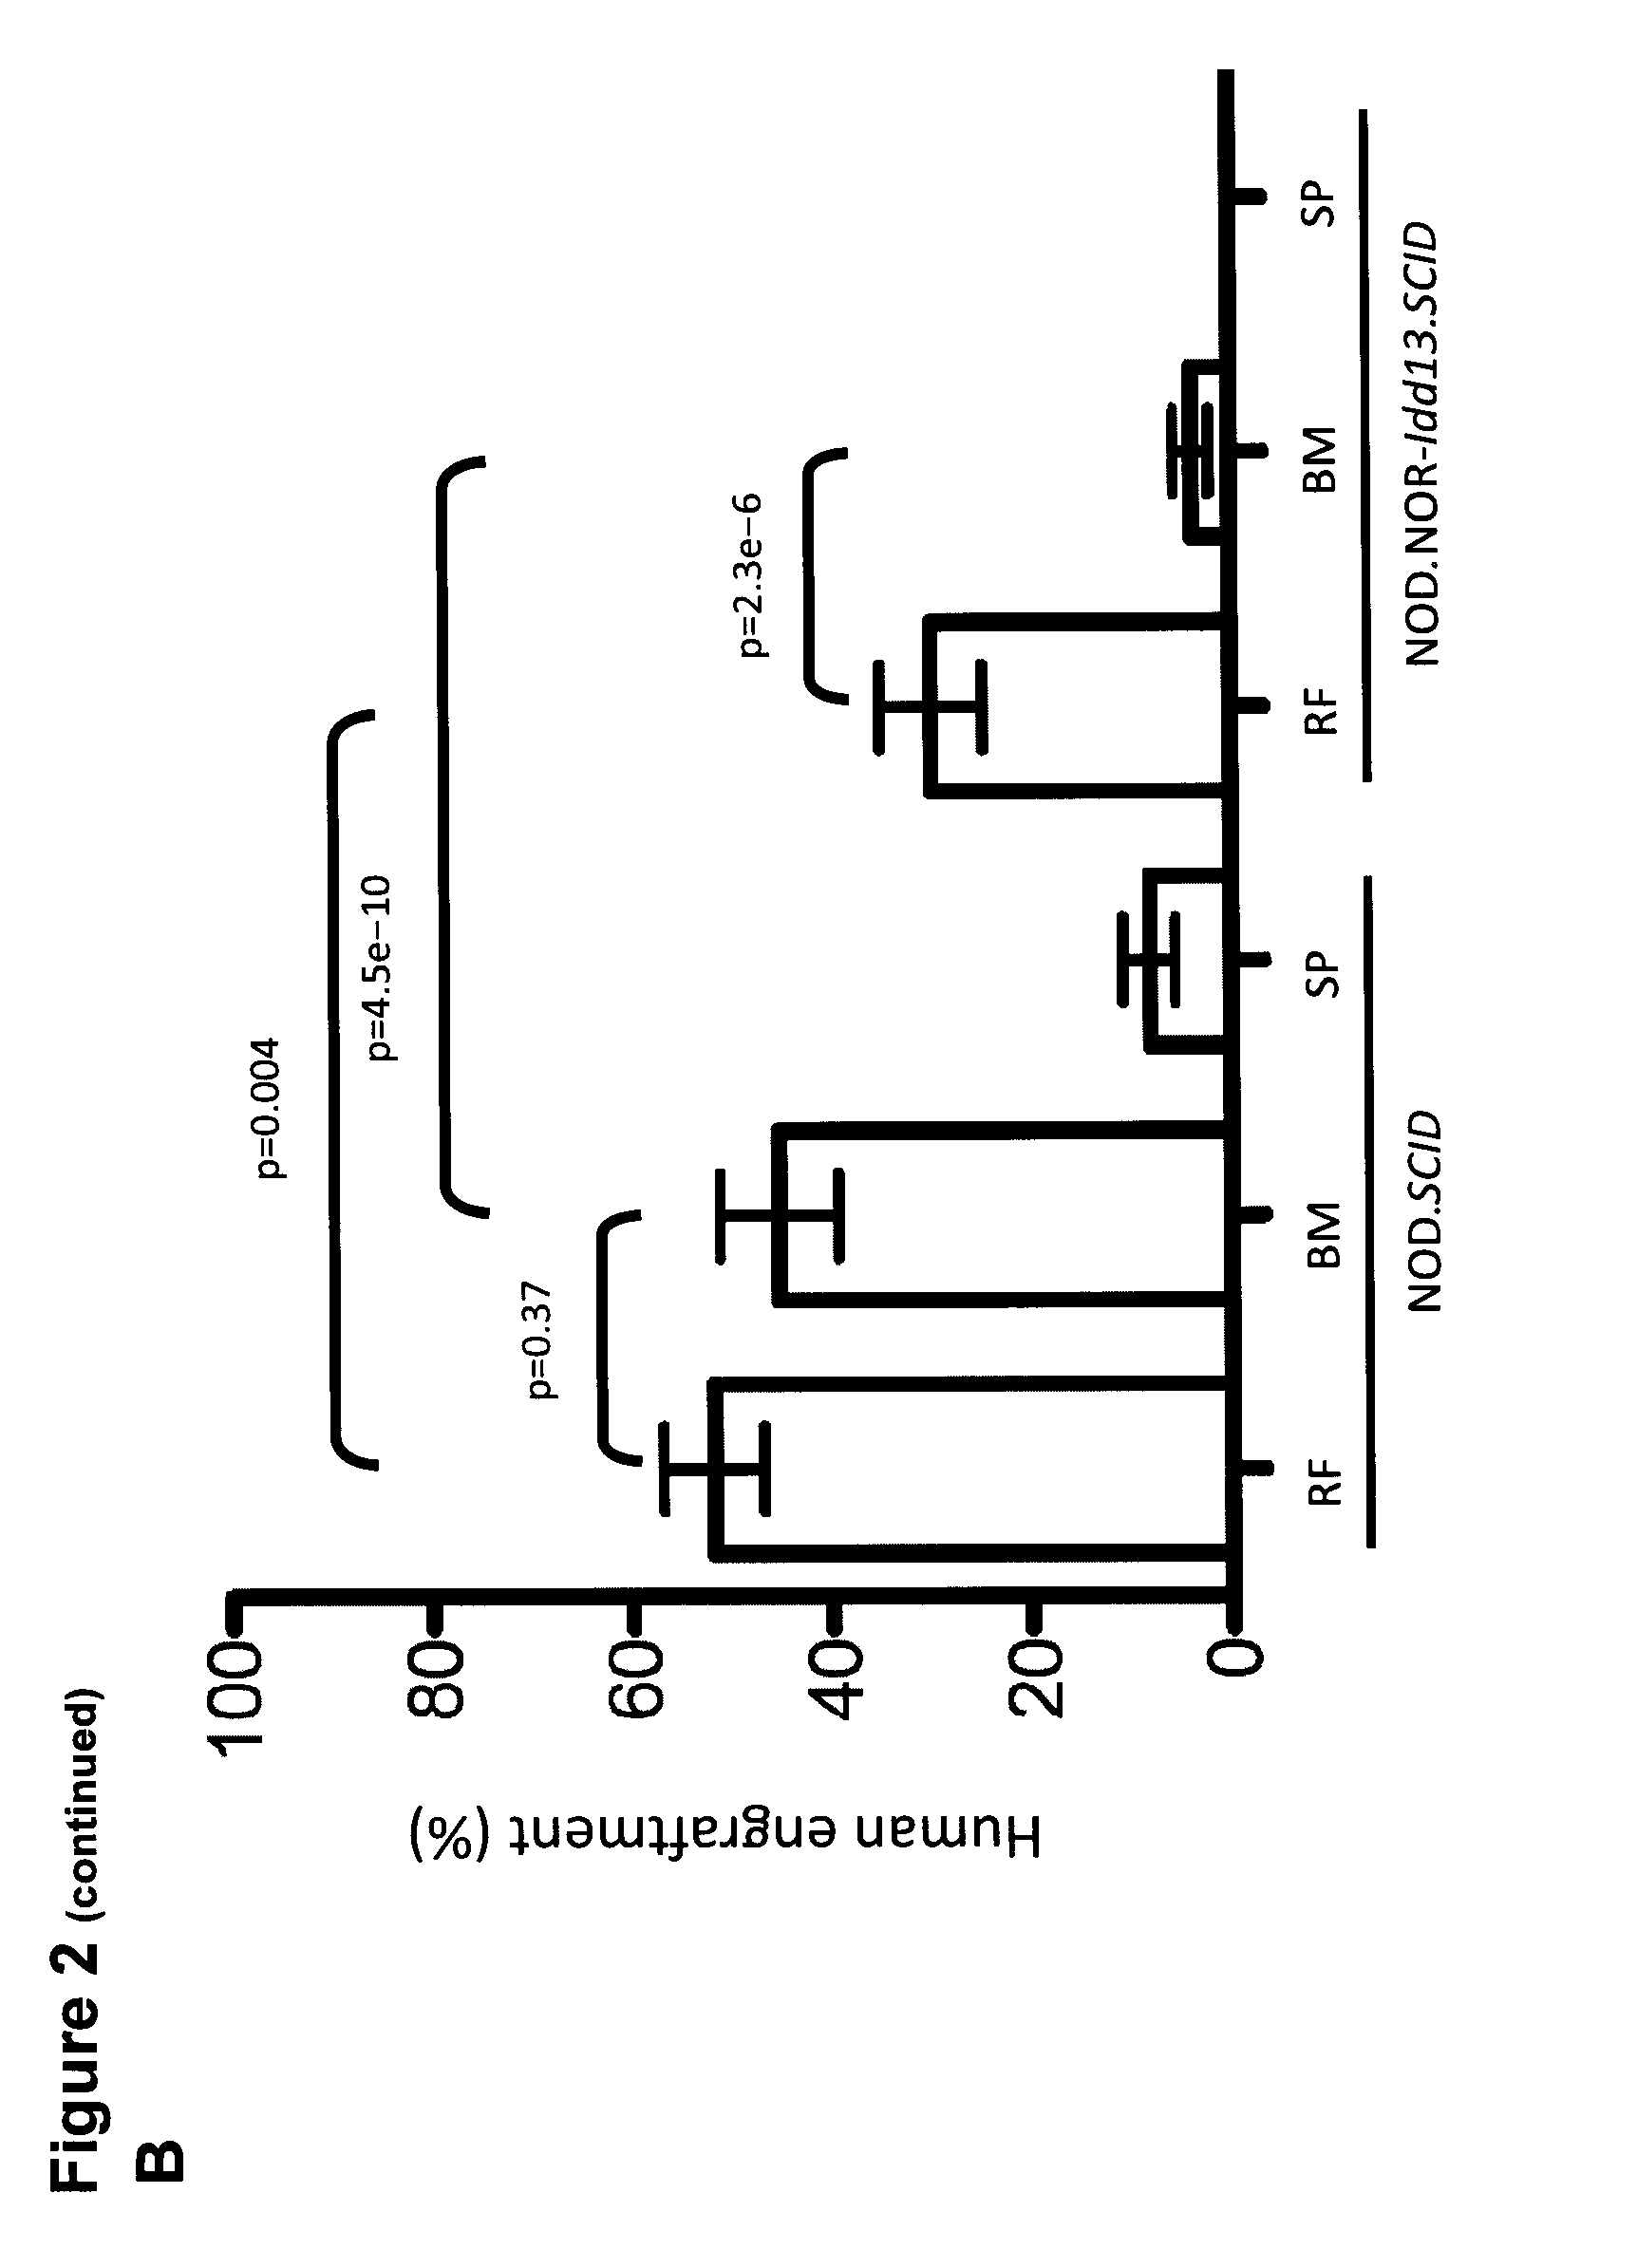 Compositions and Methods for Treating Hematological Cancers Targeting the SIRPA CD47 Interaction